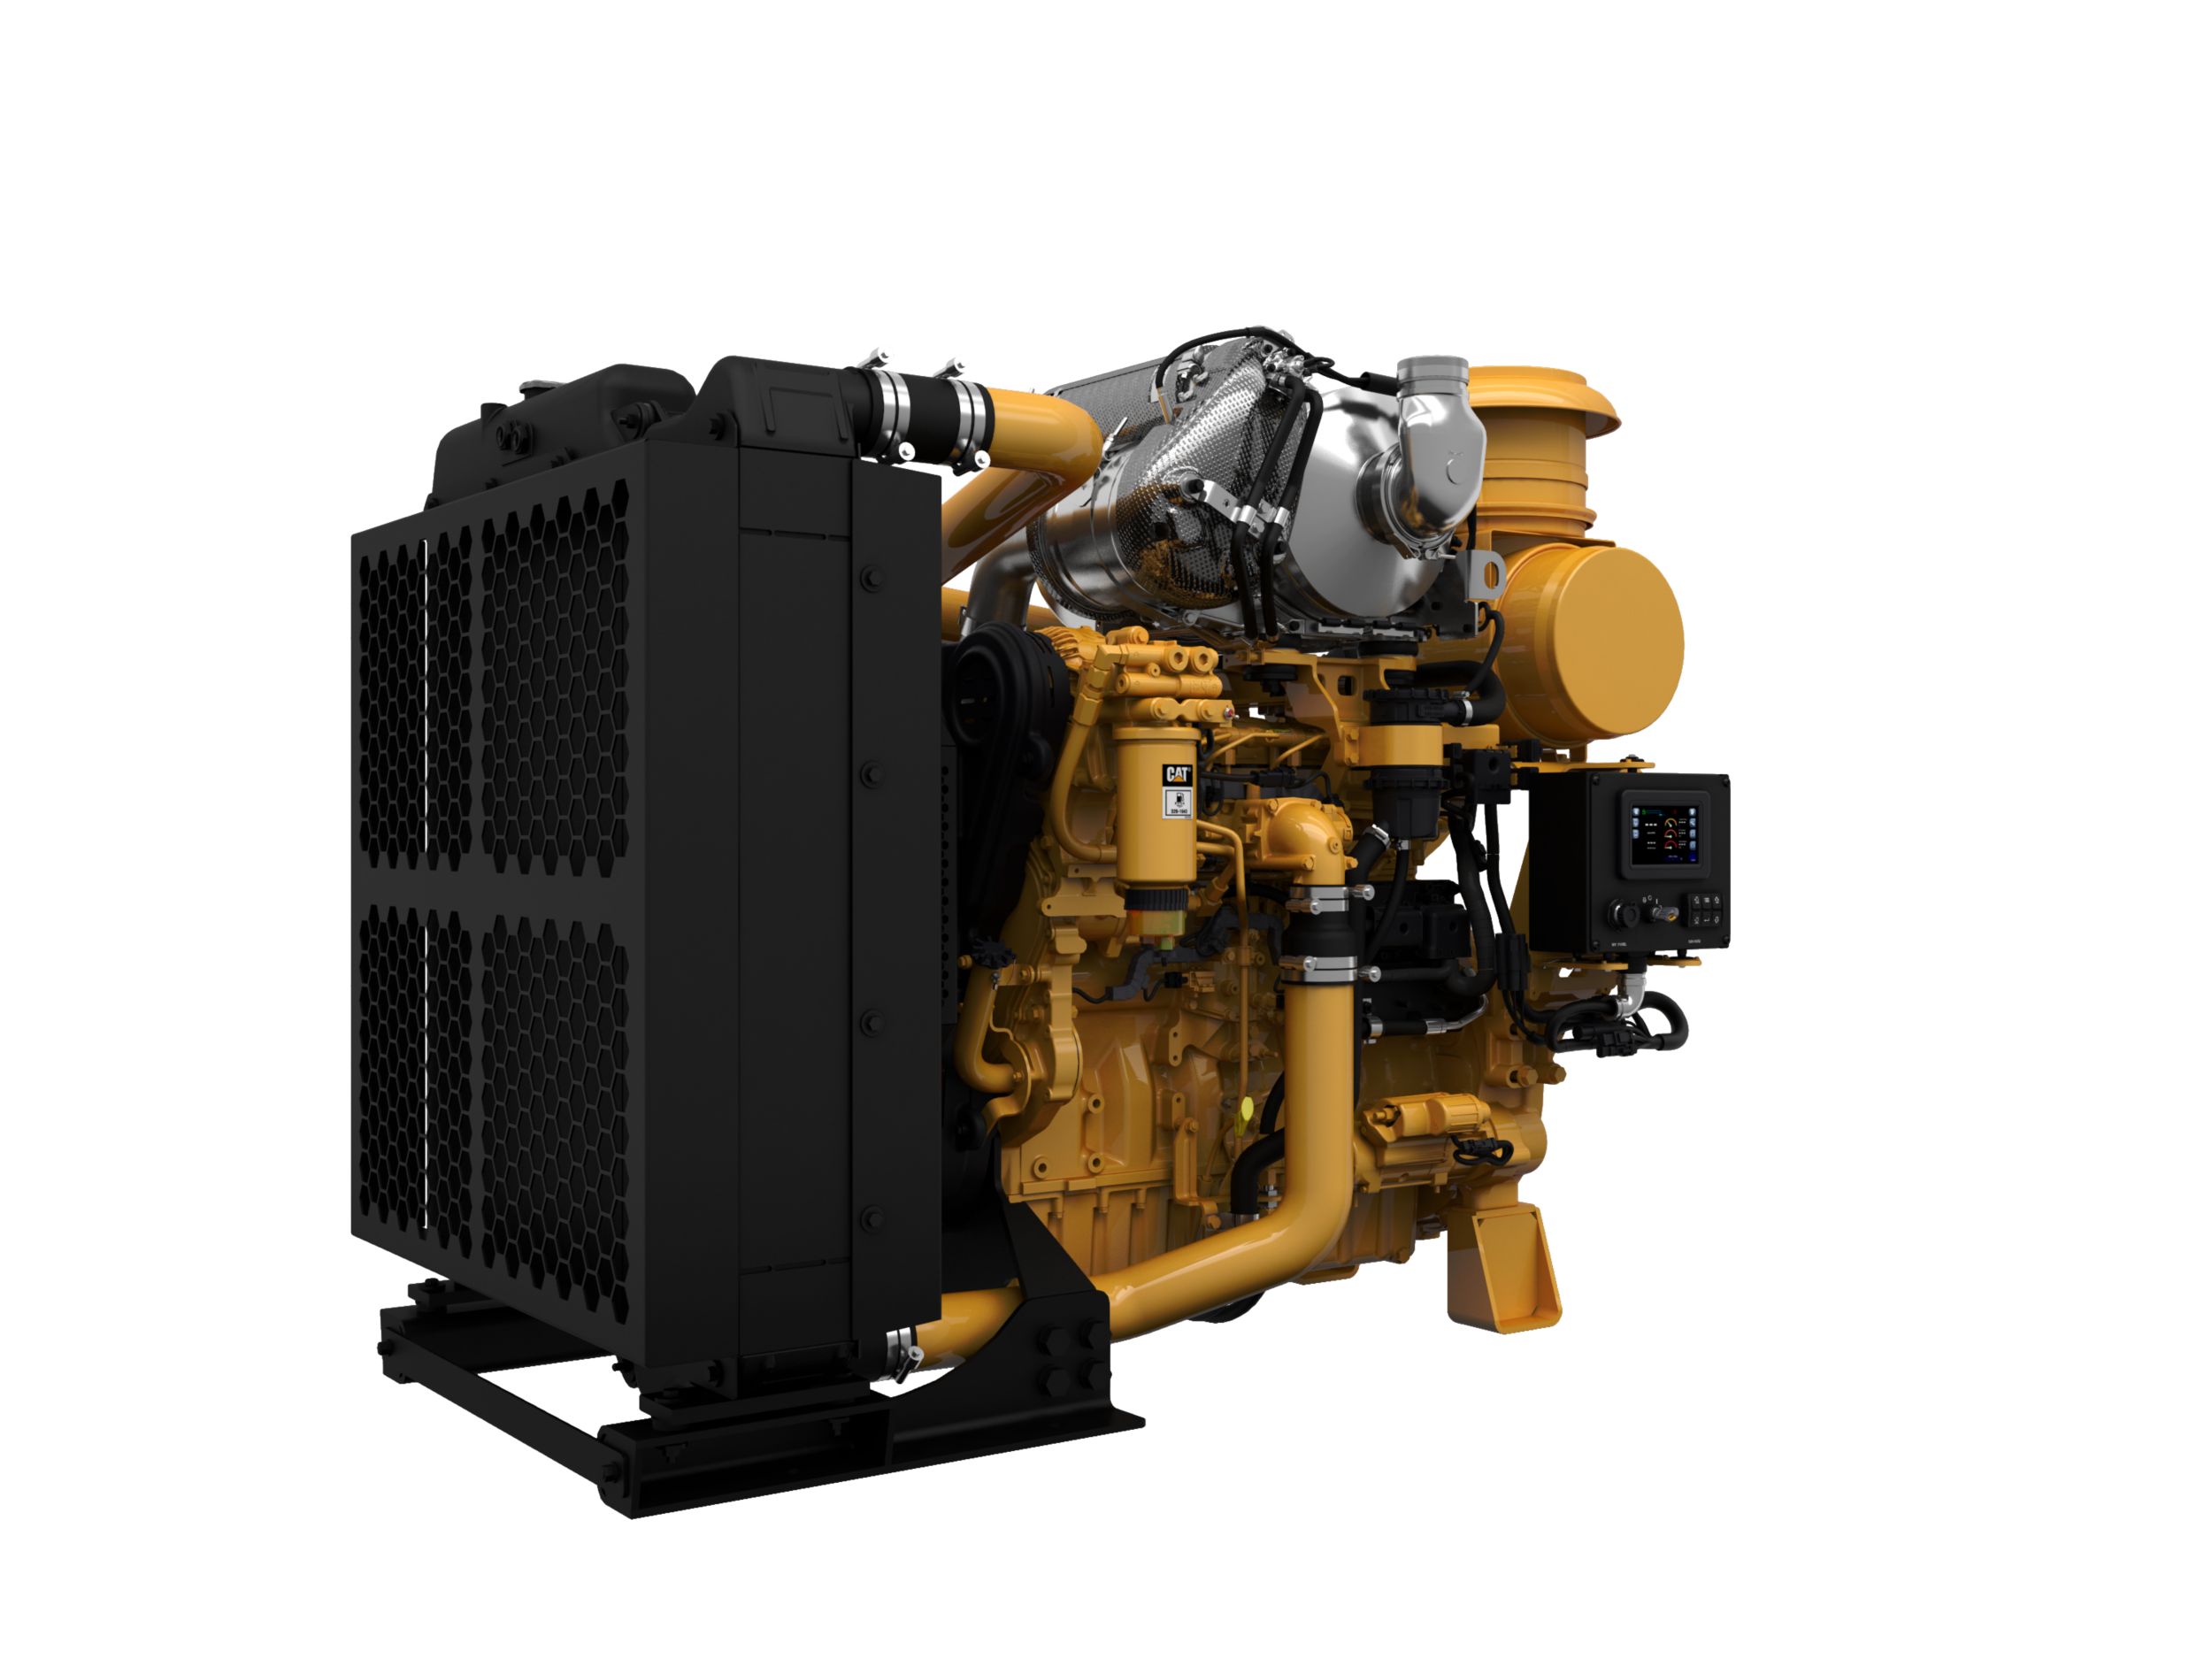 C9.3B Industrial Power Unit Diesel Power Units - Highly Regulated